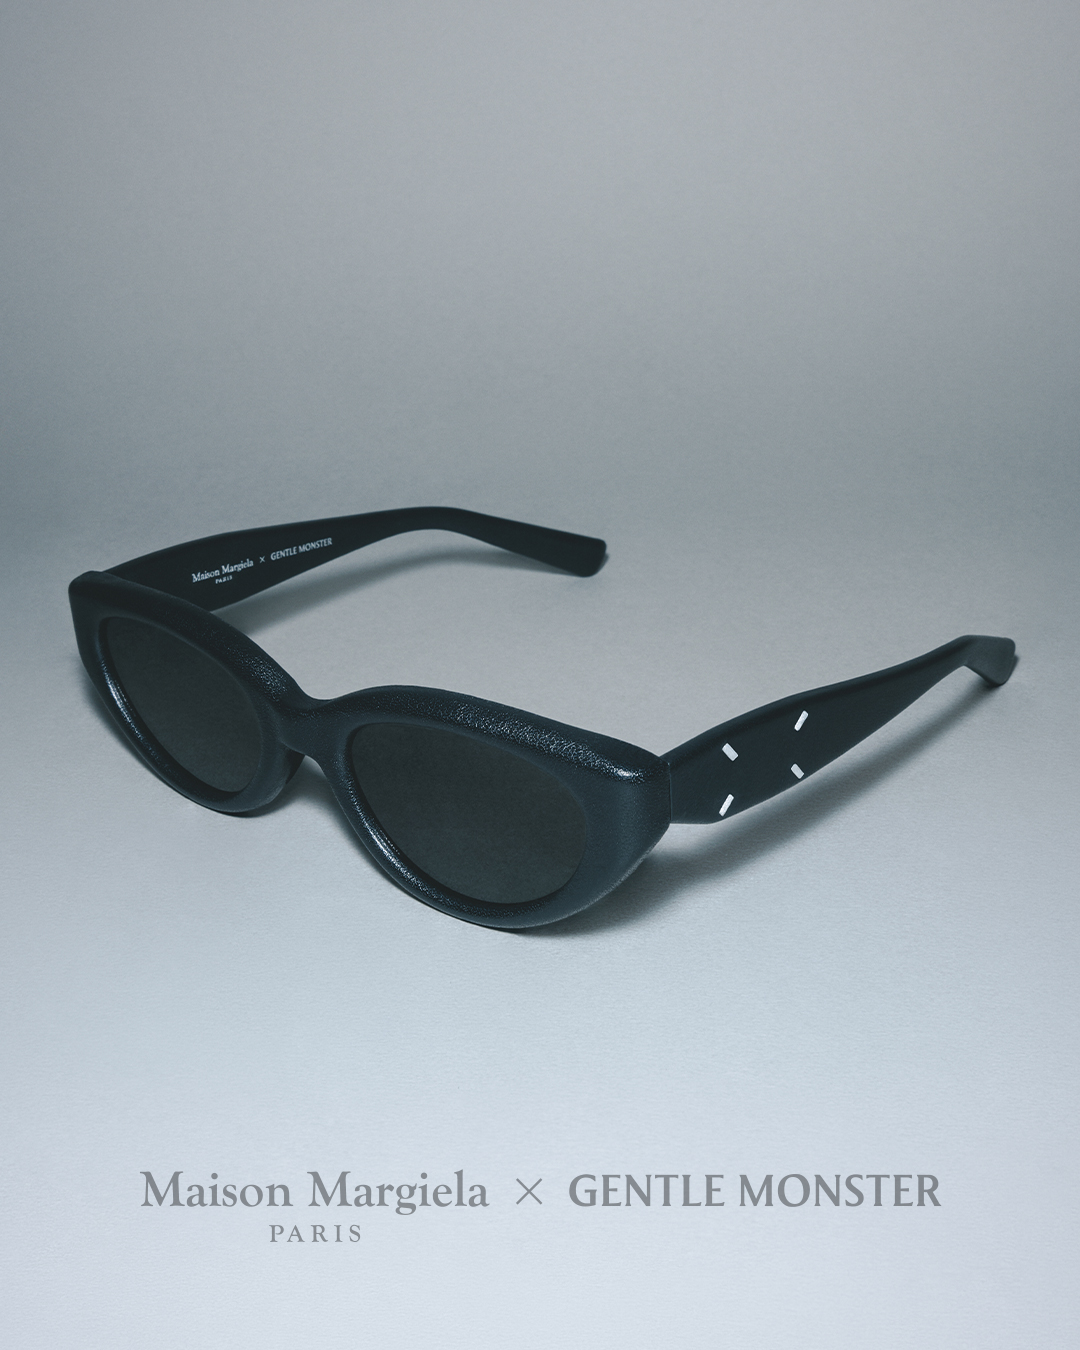 Maison Margiela and Gentle Monster Reveal Second Eyewear Collaboration Featuring Artisanal Leather-Wrapped Designs